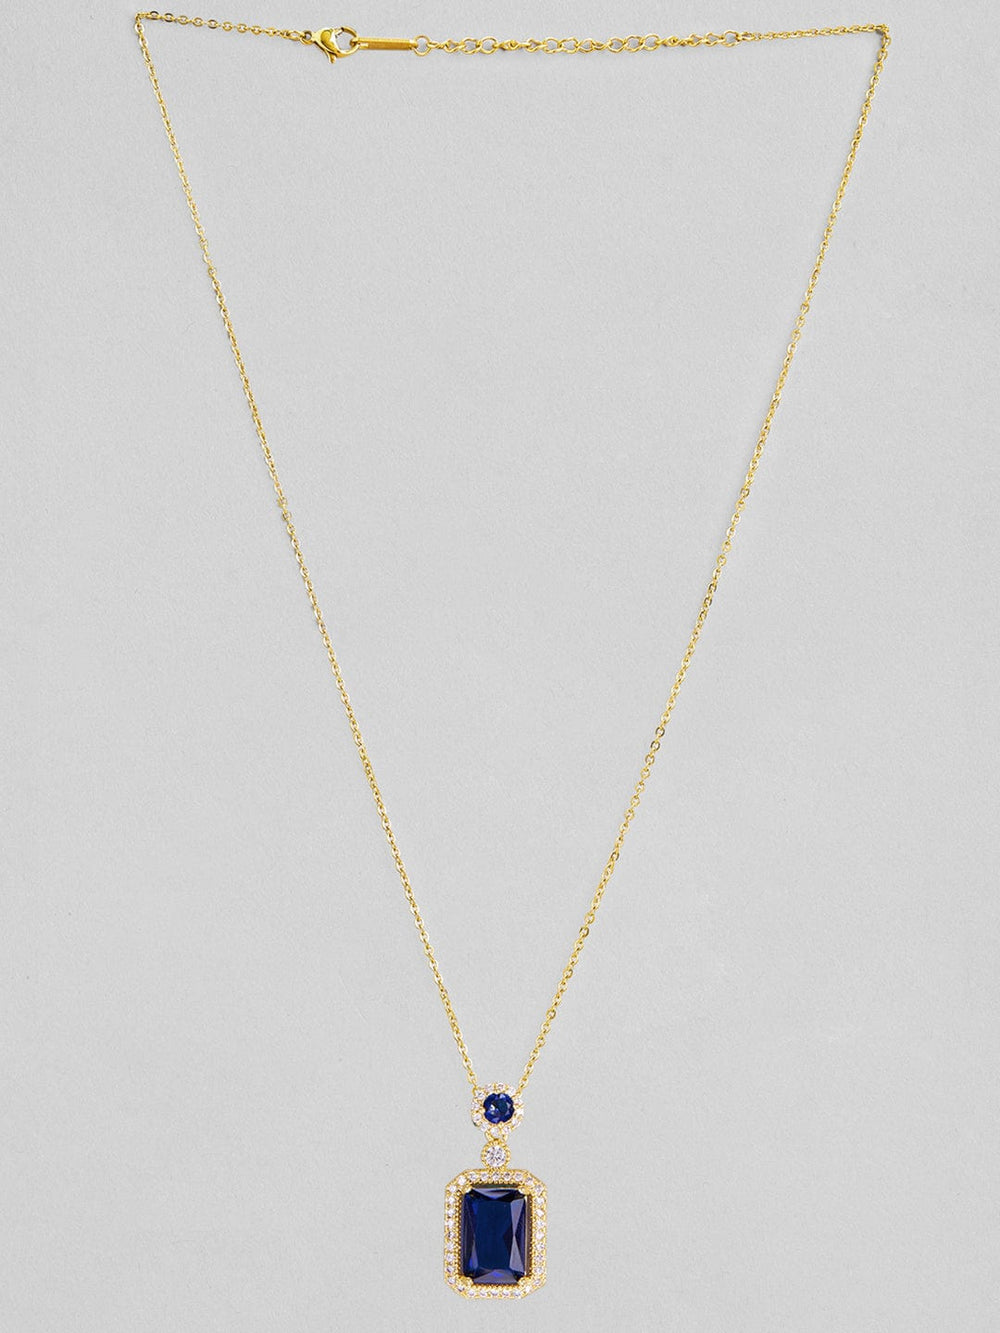 Rubans Voguish 22K Gold Plated Blue AD studded Pendant Chain. Chain & Necklaces